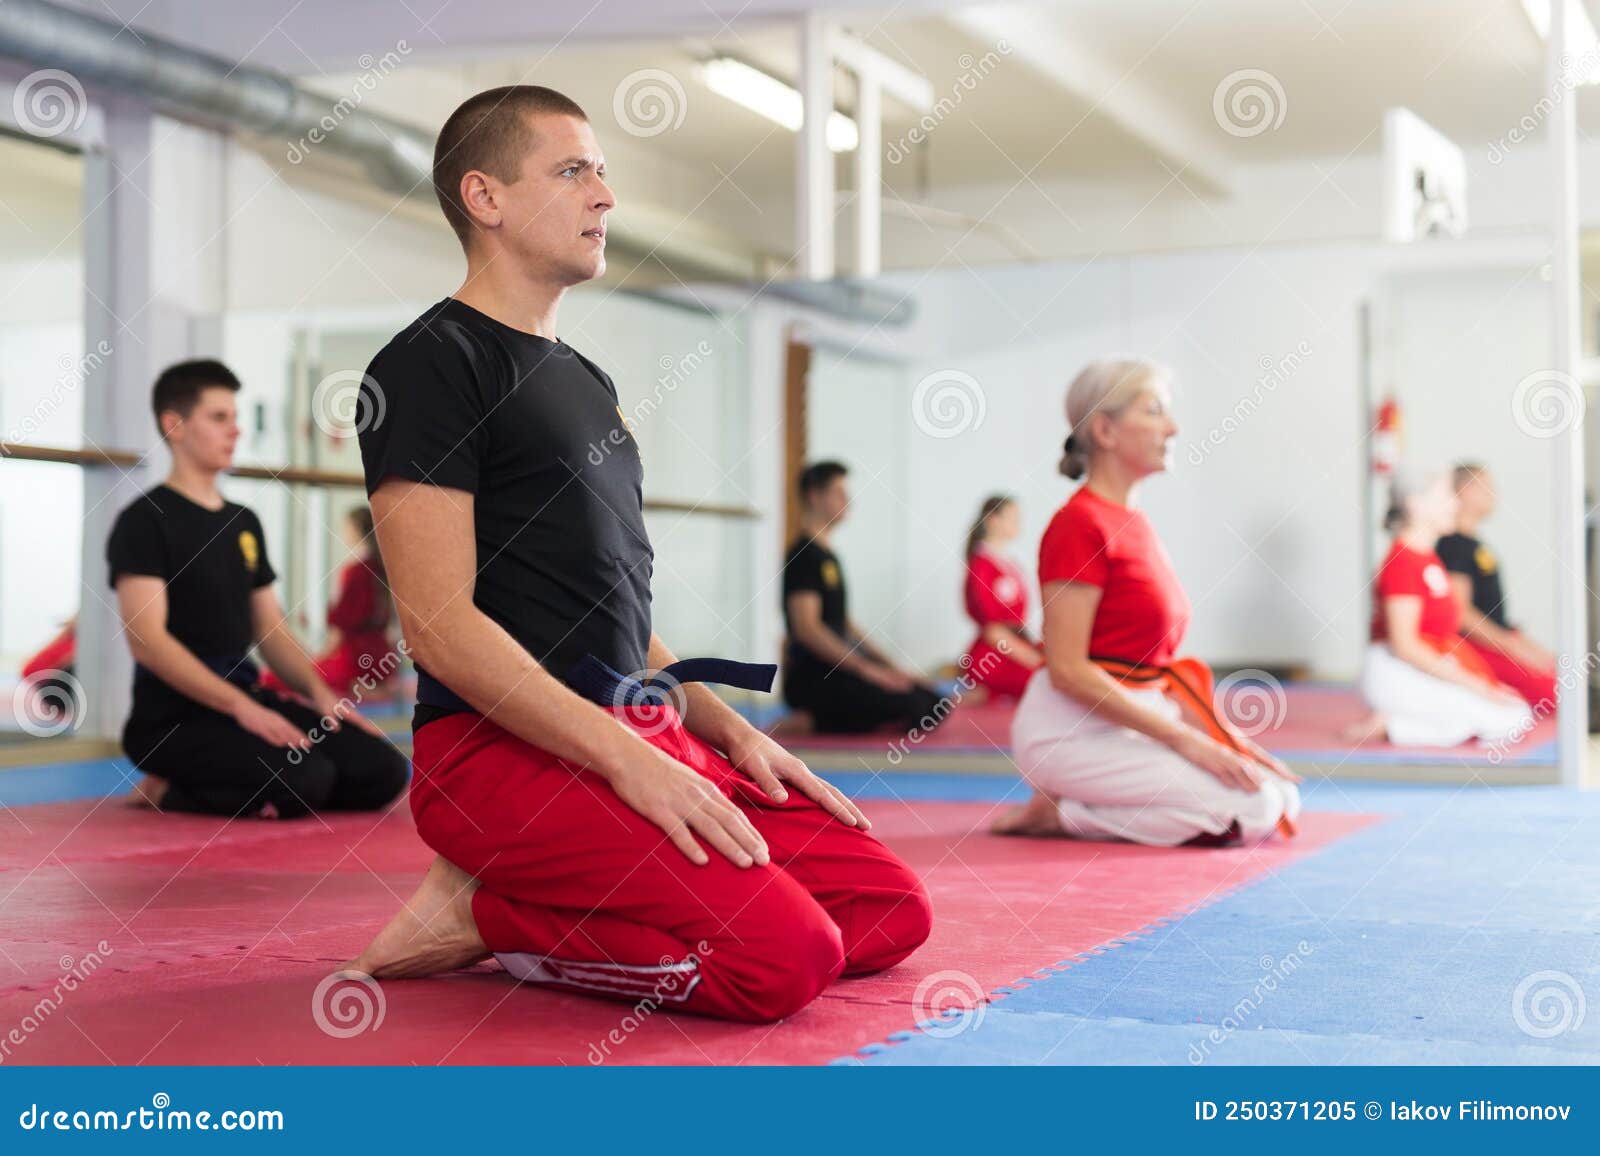 Group Of Athletes Cheering Karate Coach Before Training Stock Image